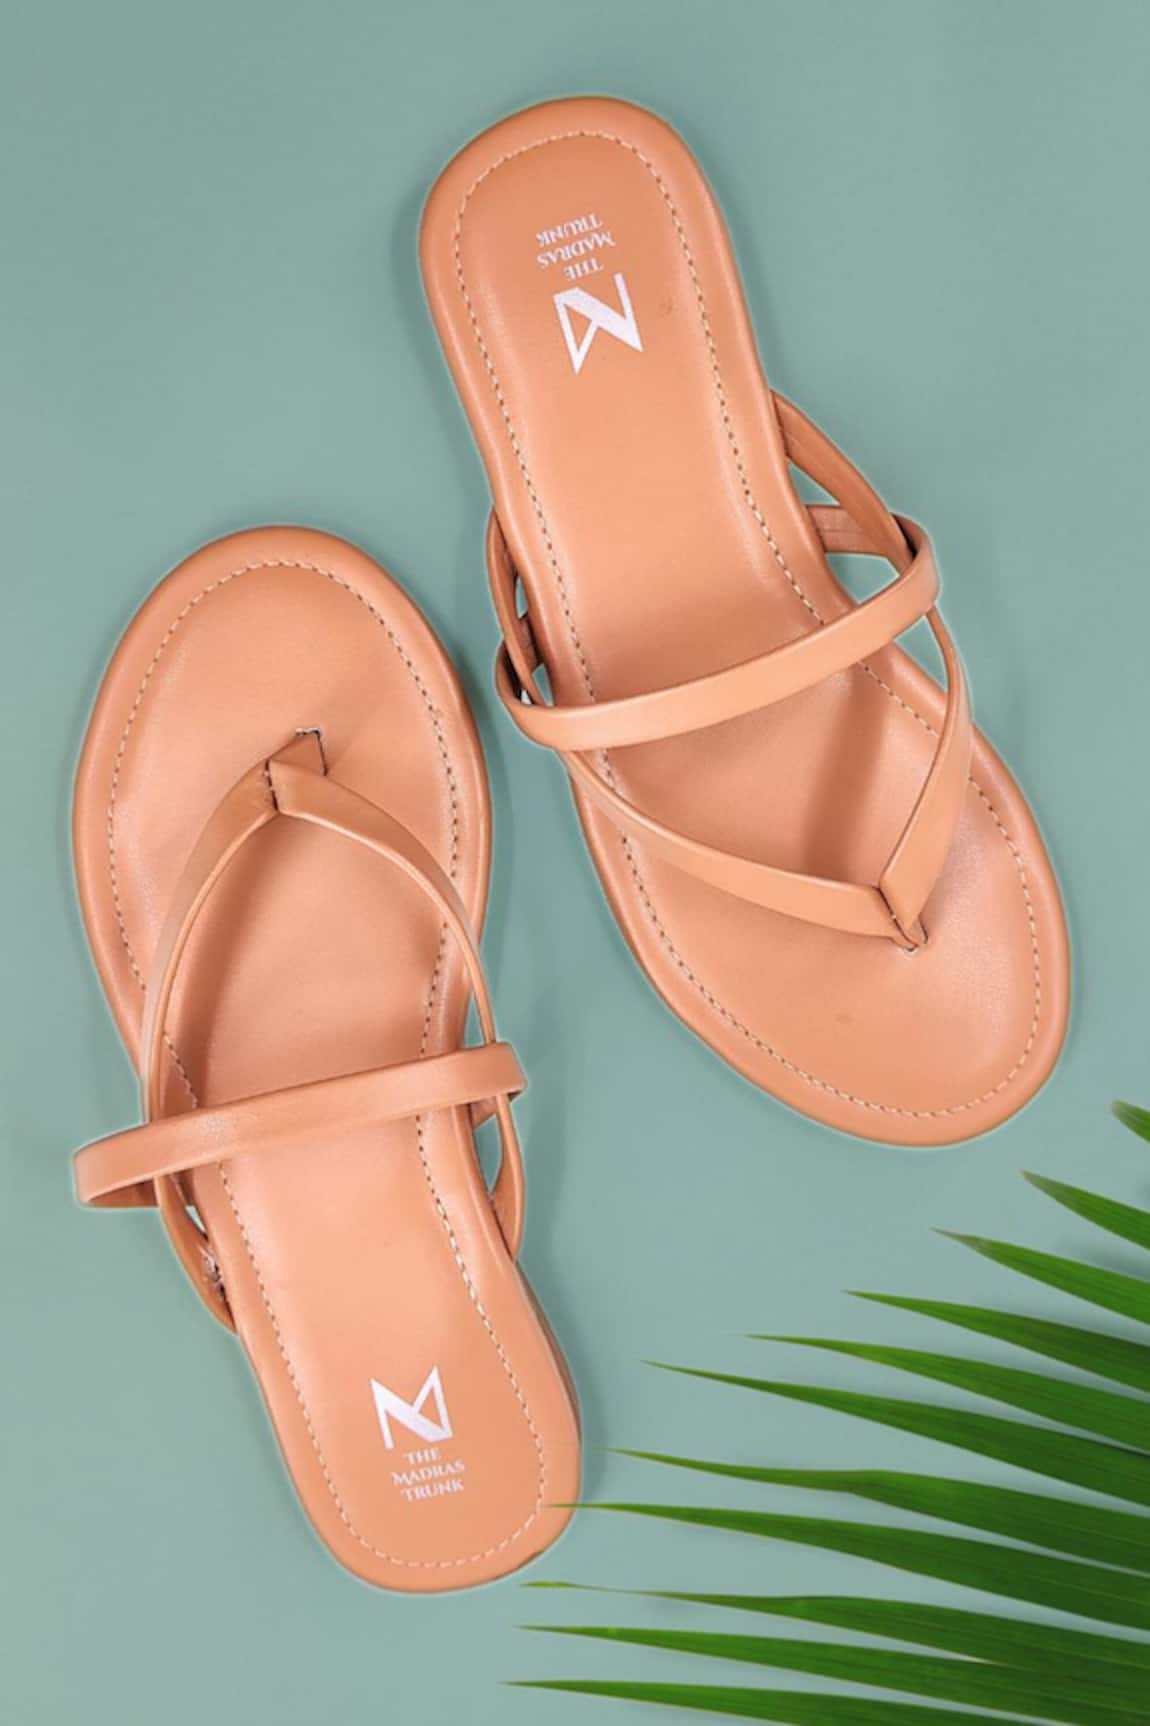 The Madras Trunk Mystique A Strap Slip On Sandals